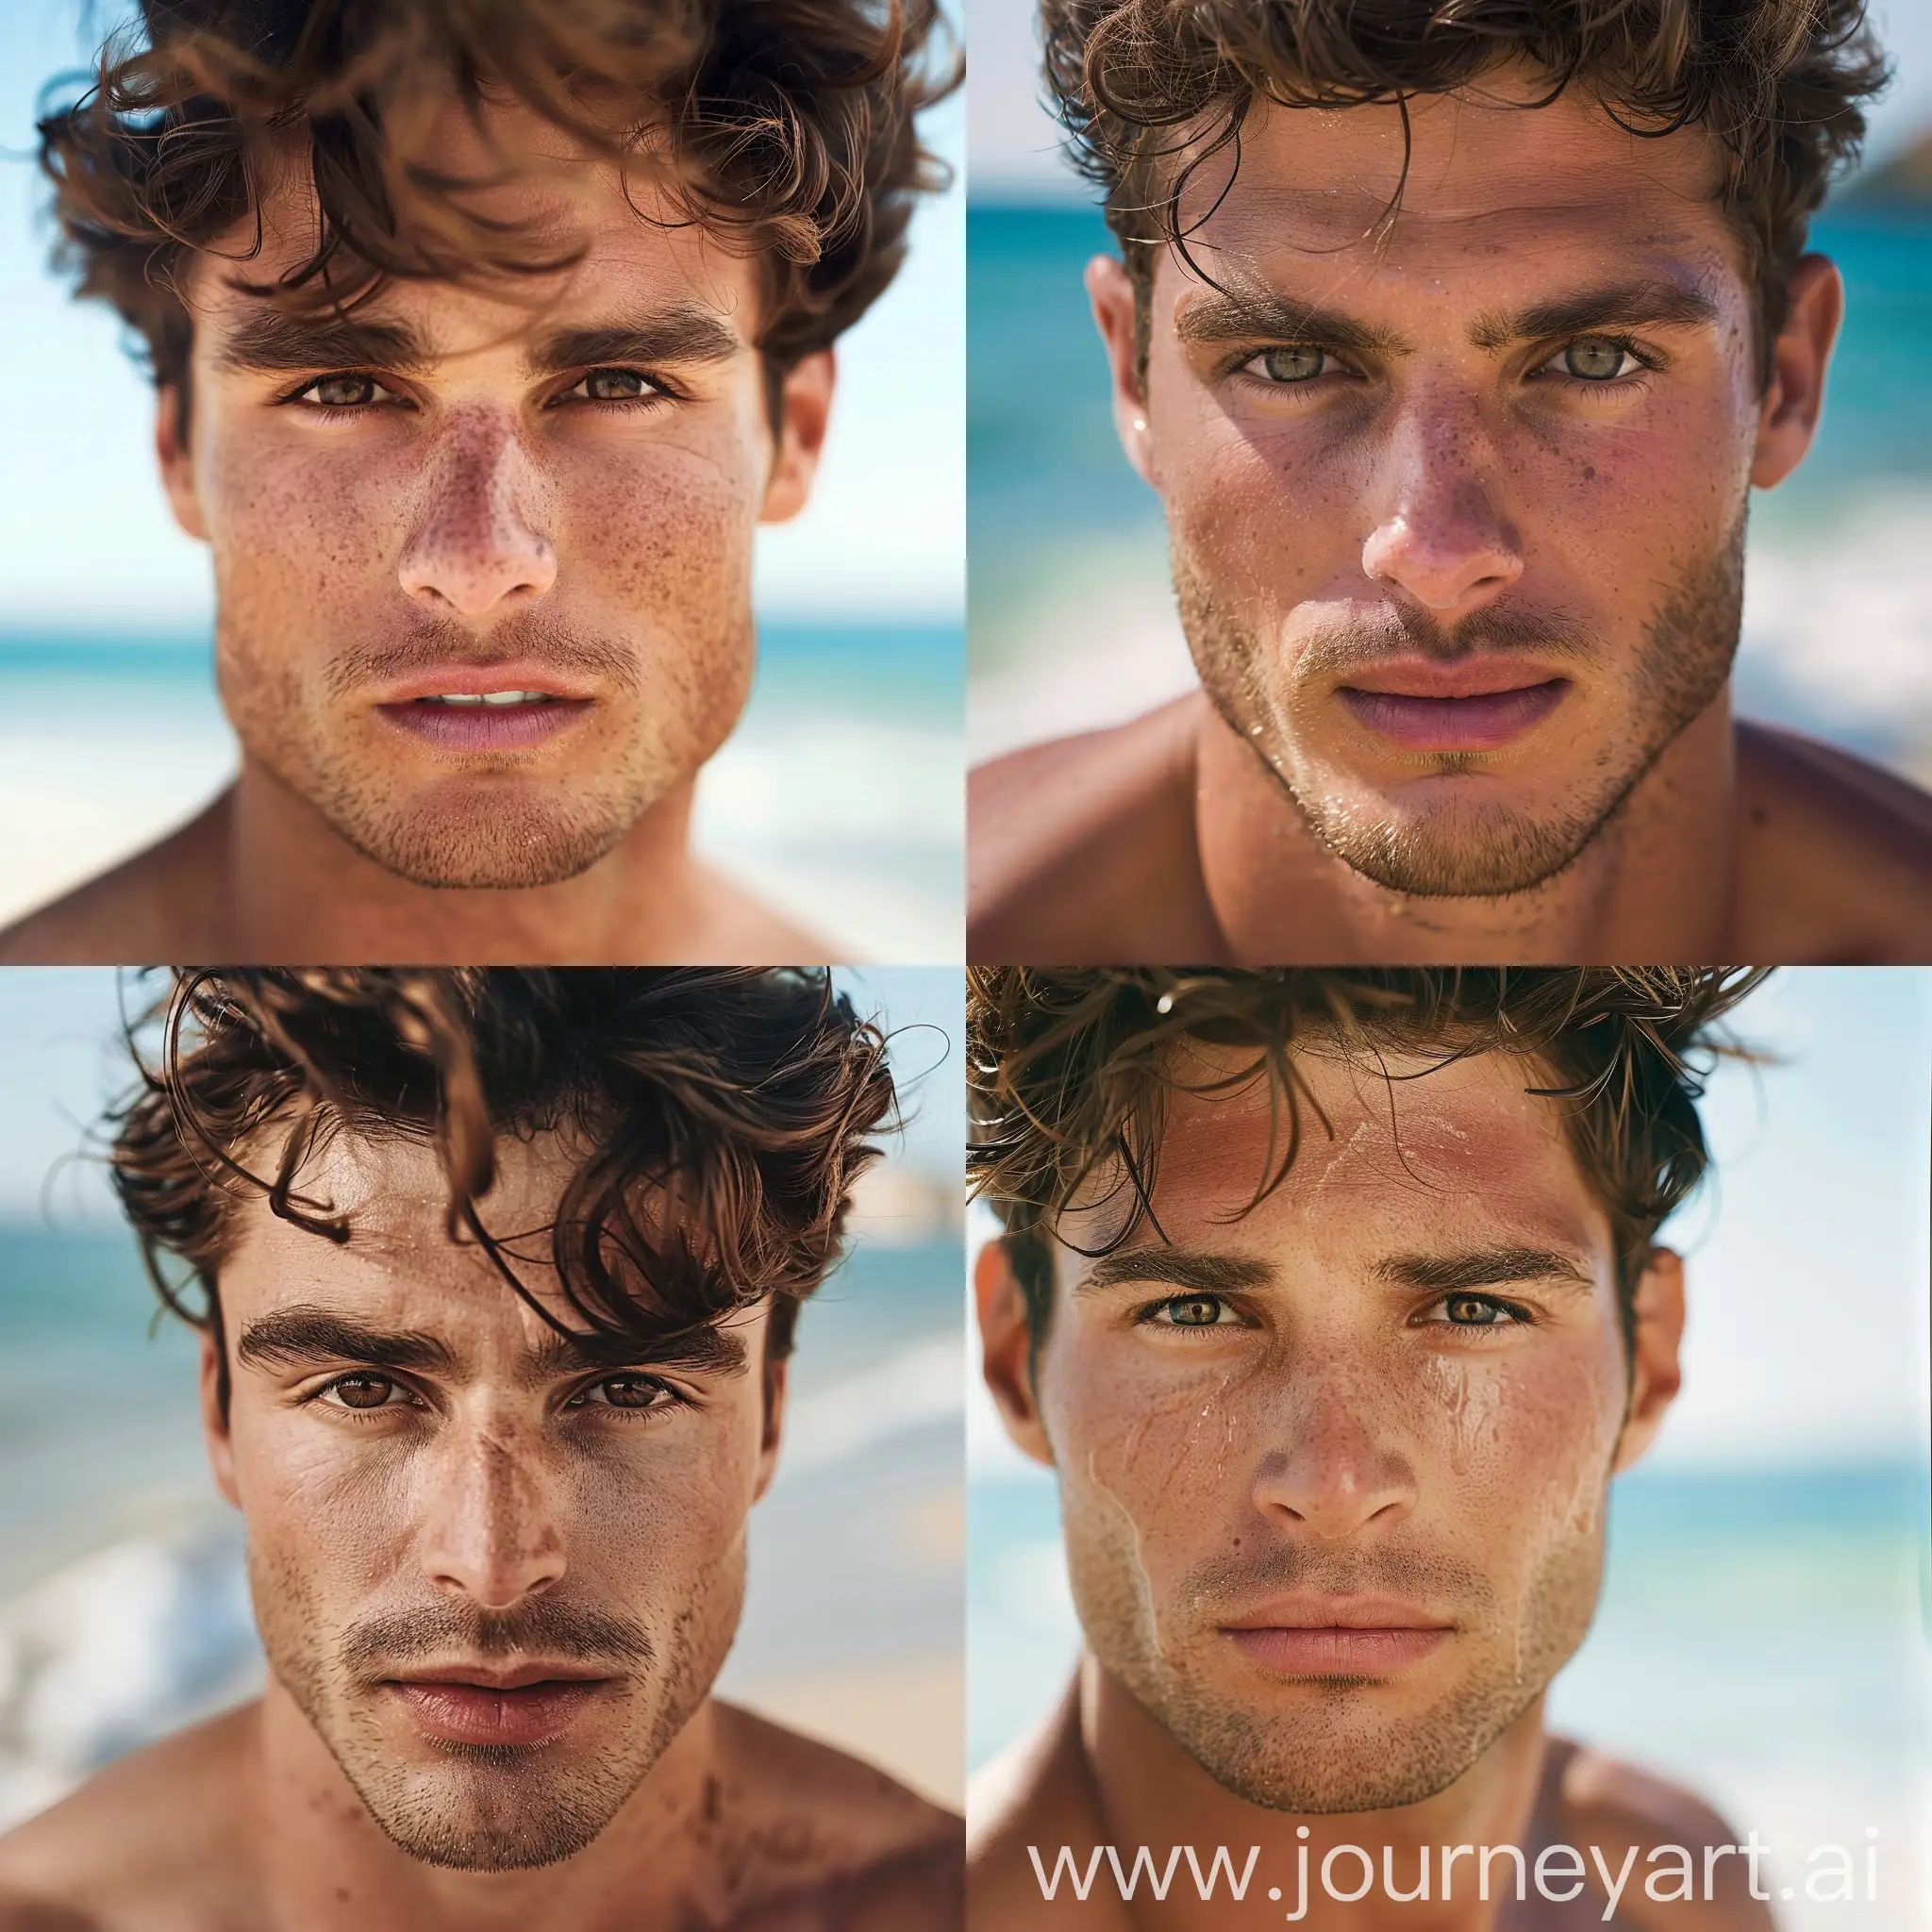 muslce man at beach with brown hair and eyes